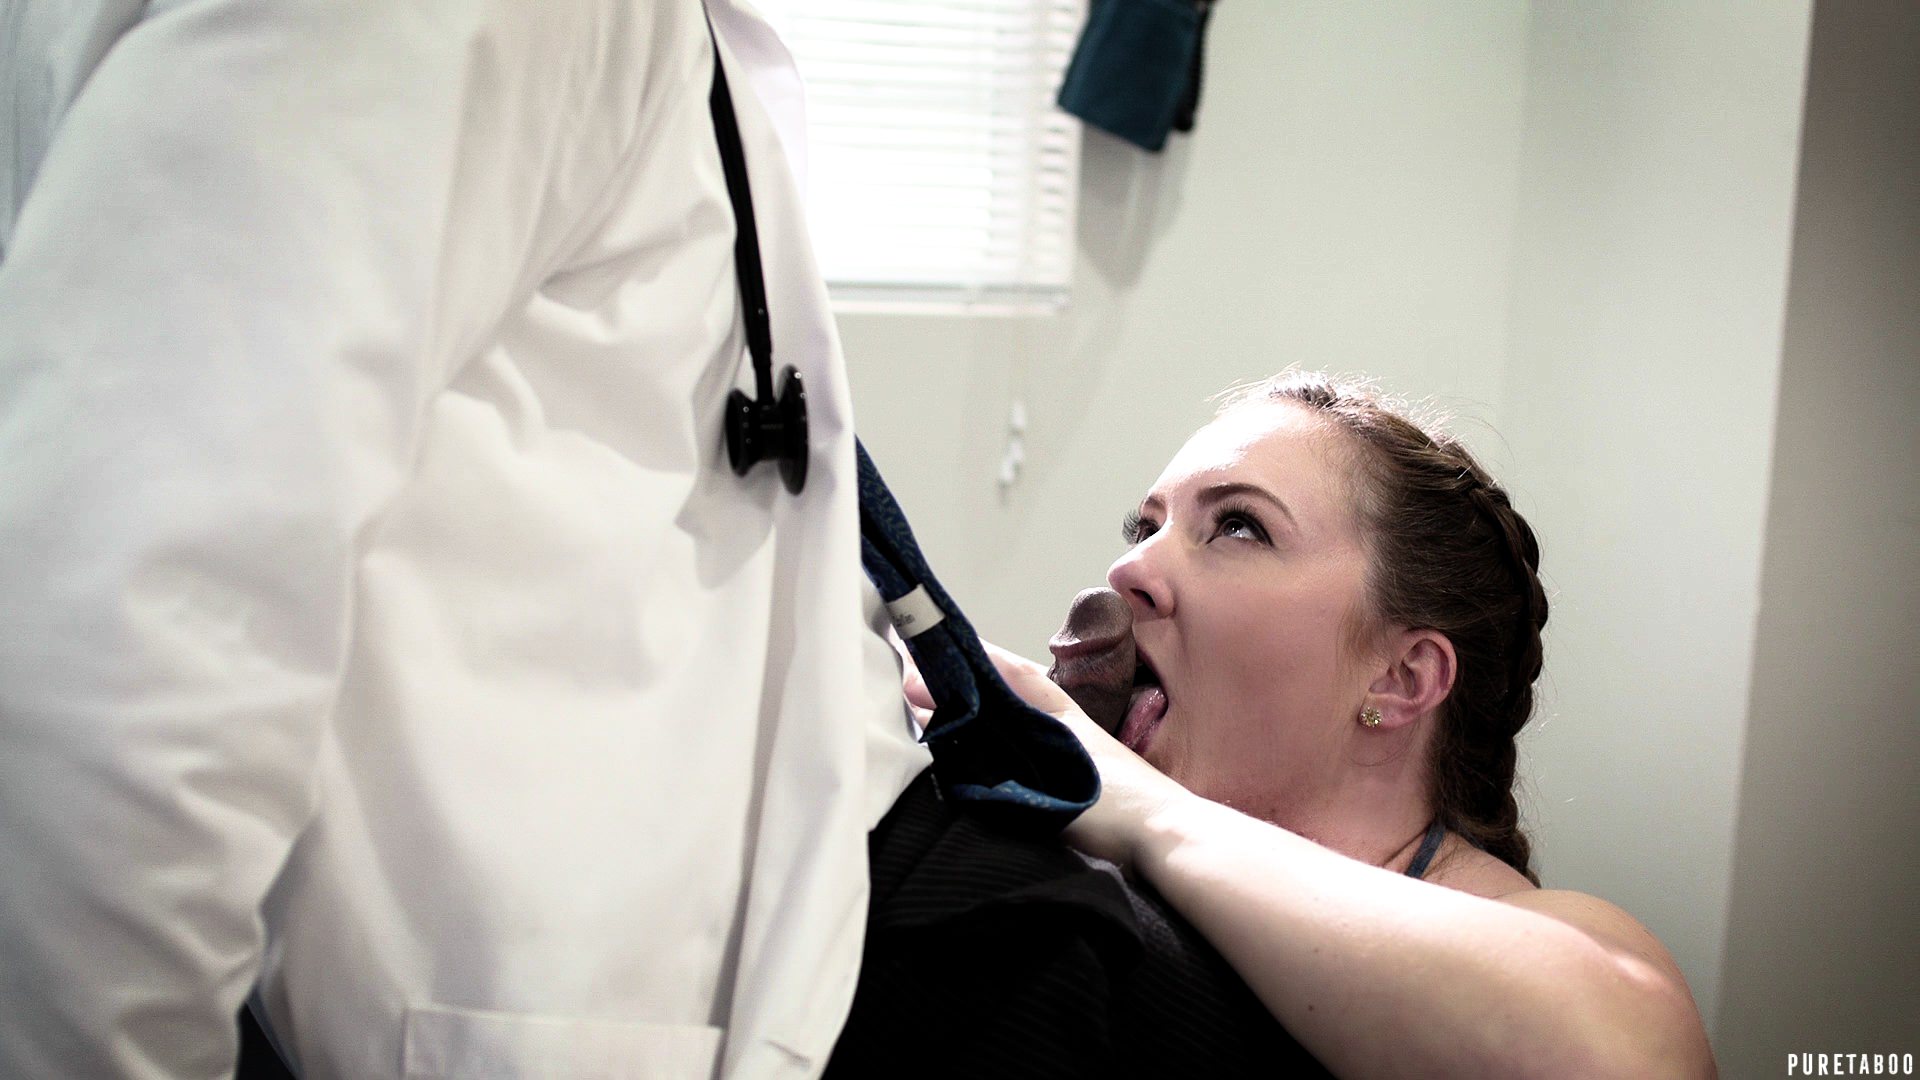 Pure Taboo 'The Rectal Exam' starring Maddy O'Reilly (Photo 18)